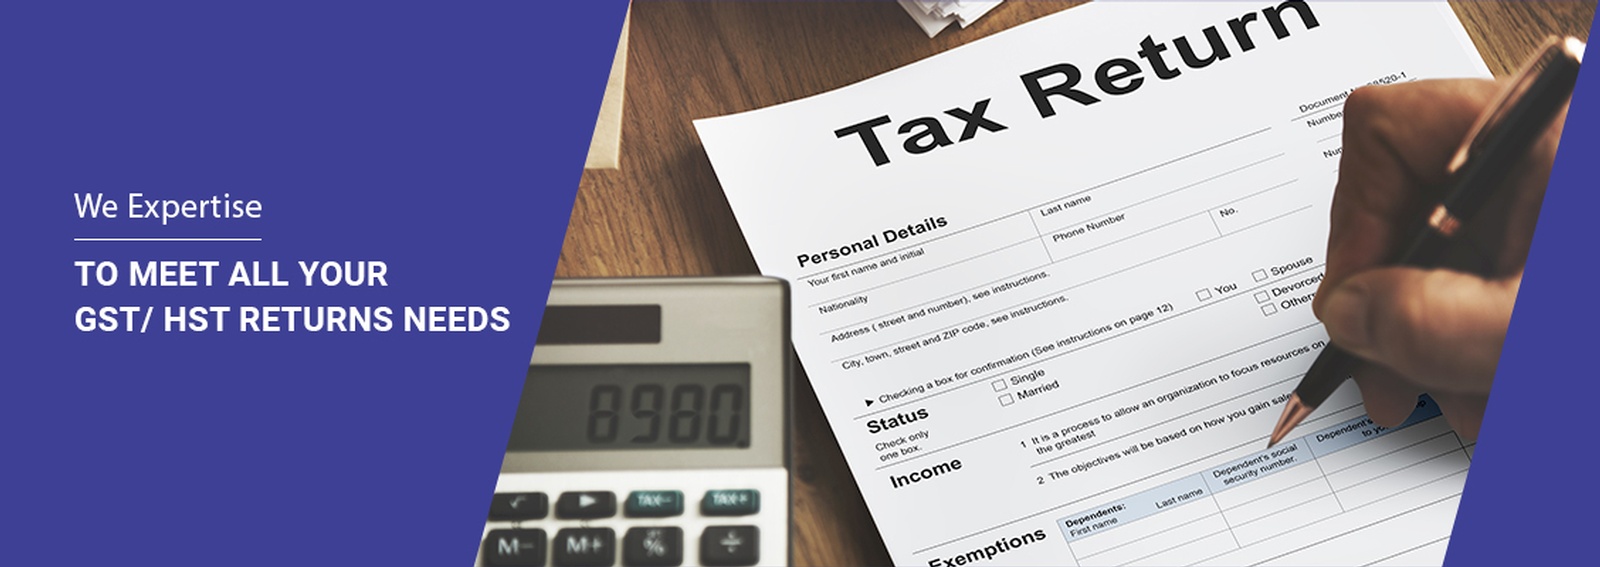 We ensure filing of tax returns on a timely basis to avoid late payments and interest.